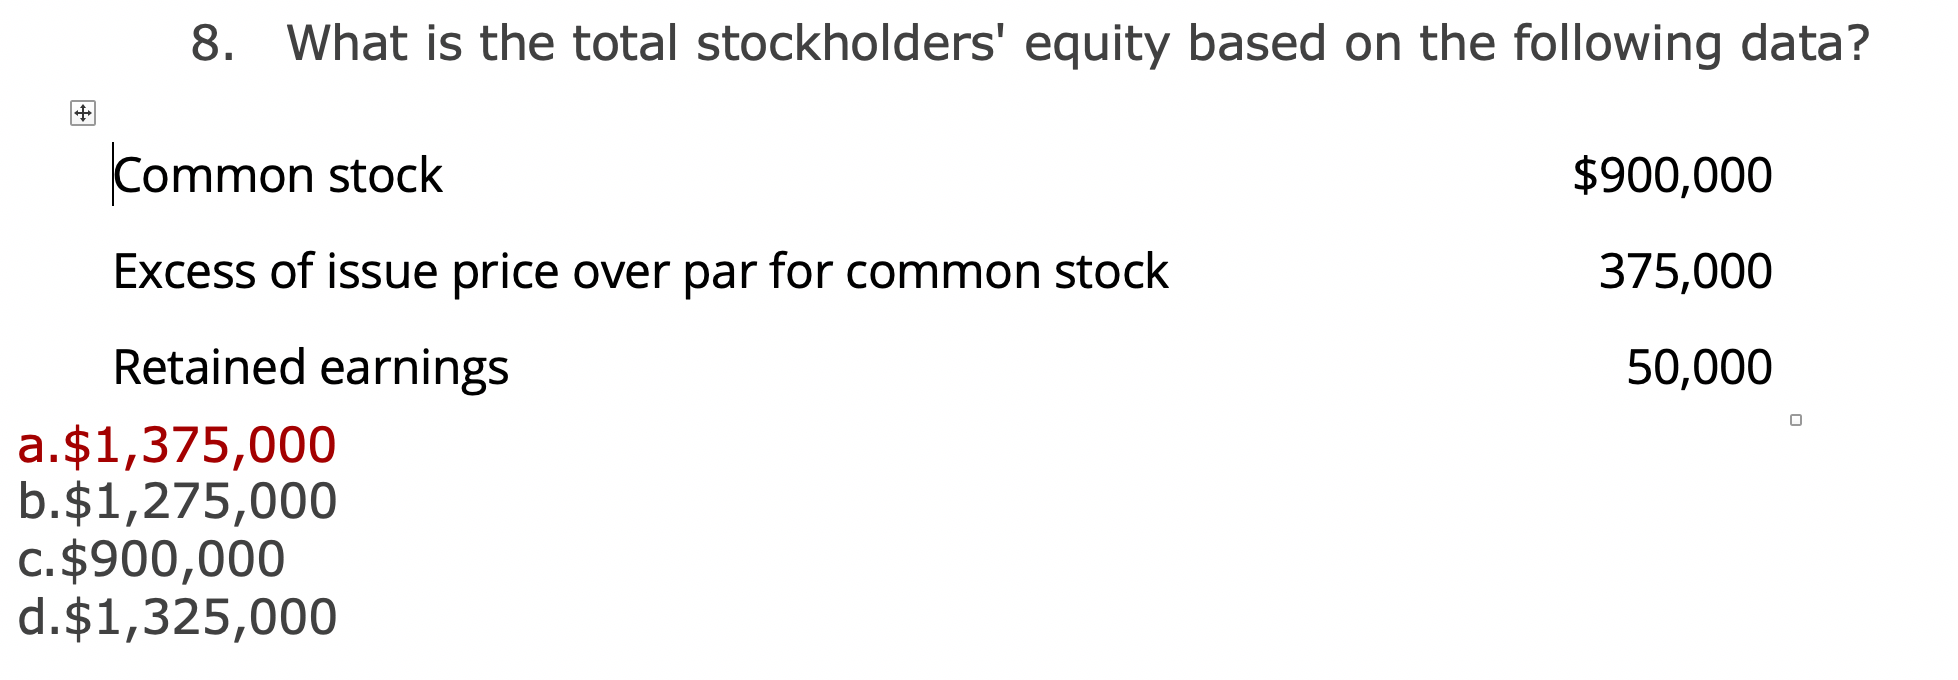 8.
What is the total stockholders' equity based on the following data
Common stock
$900,000
Excess of issue price over par for common stock
375,000
Retained earnings
50,000
a.$1,375,000
b.$1,275,000
c.$900,000
d.$1,325,000
田
